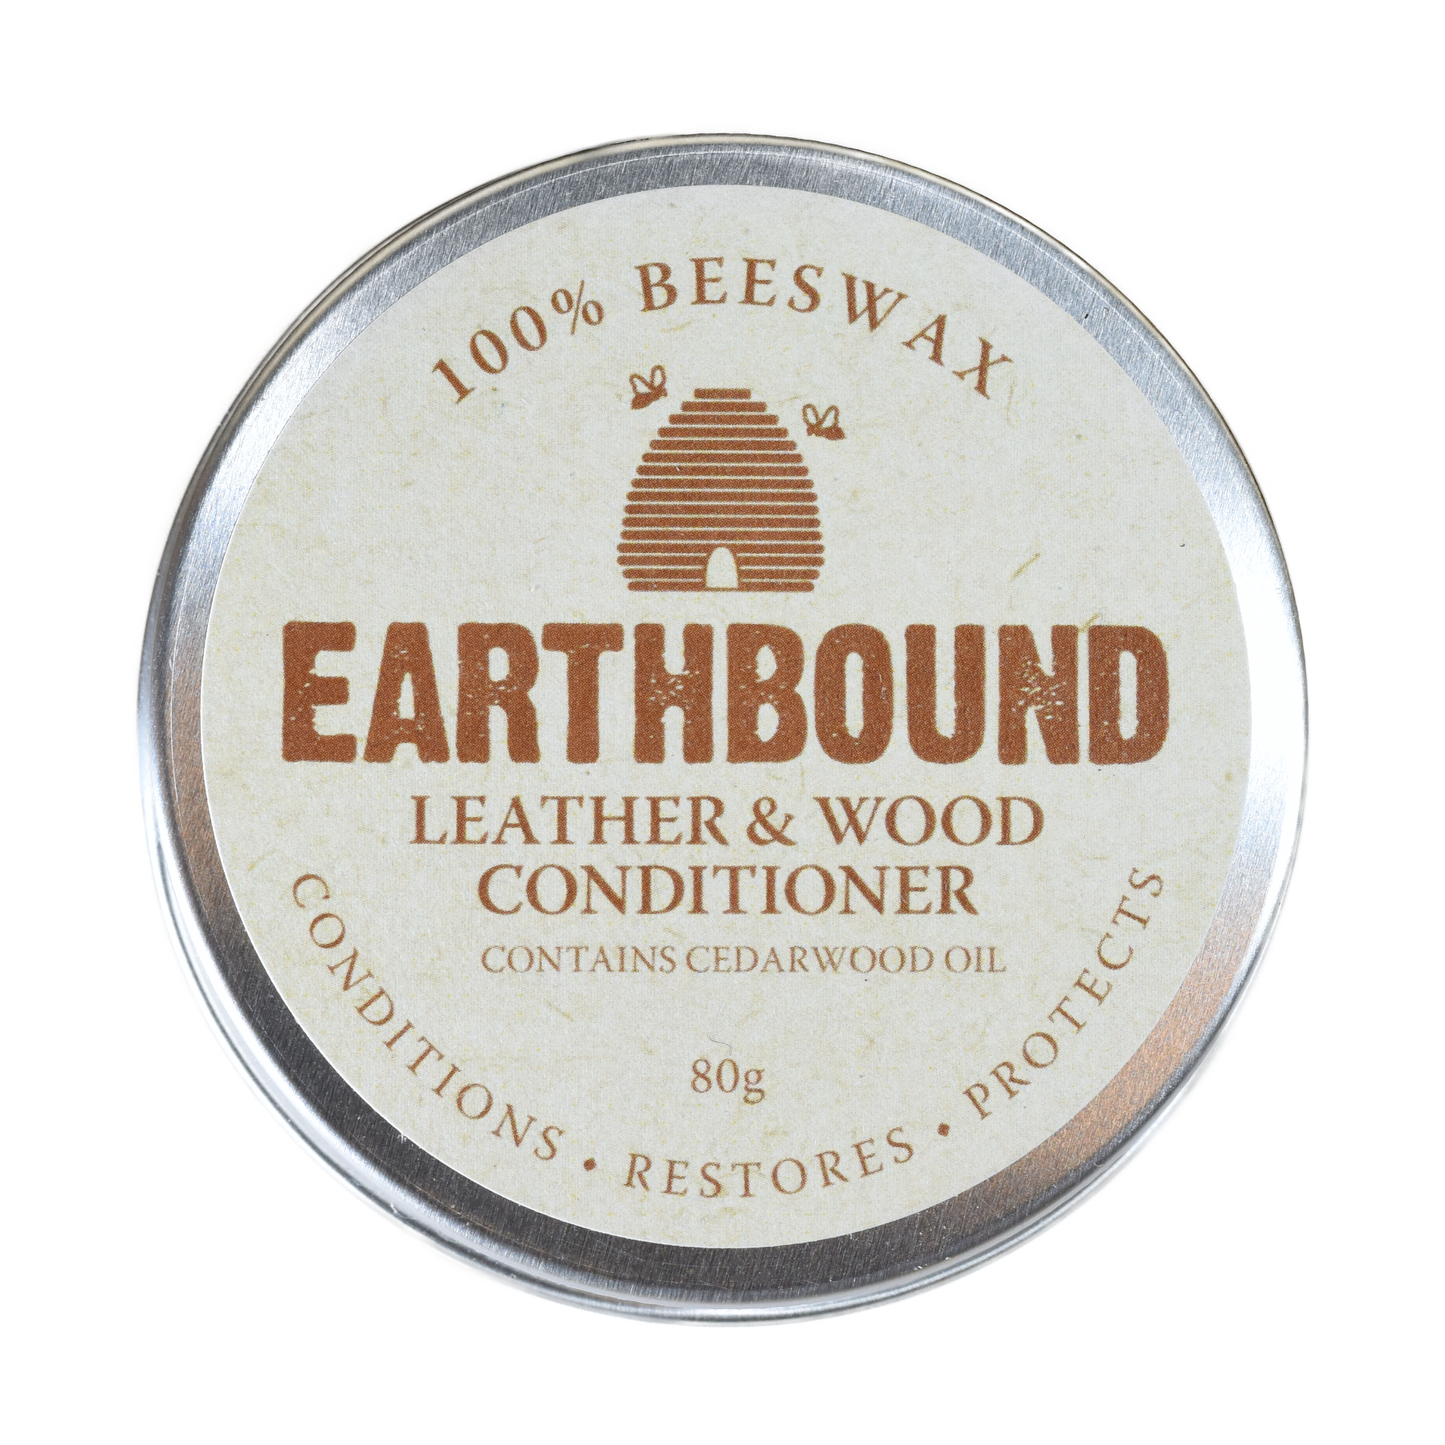 Buy Earthbound Leather & Wood Conditioner | Topic Store